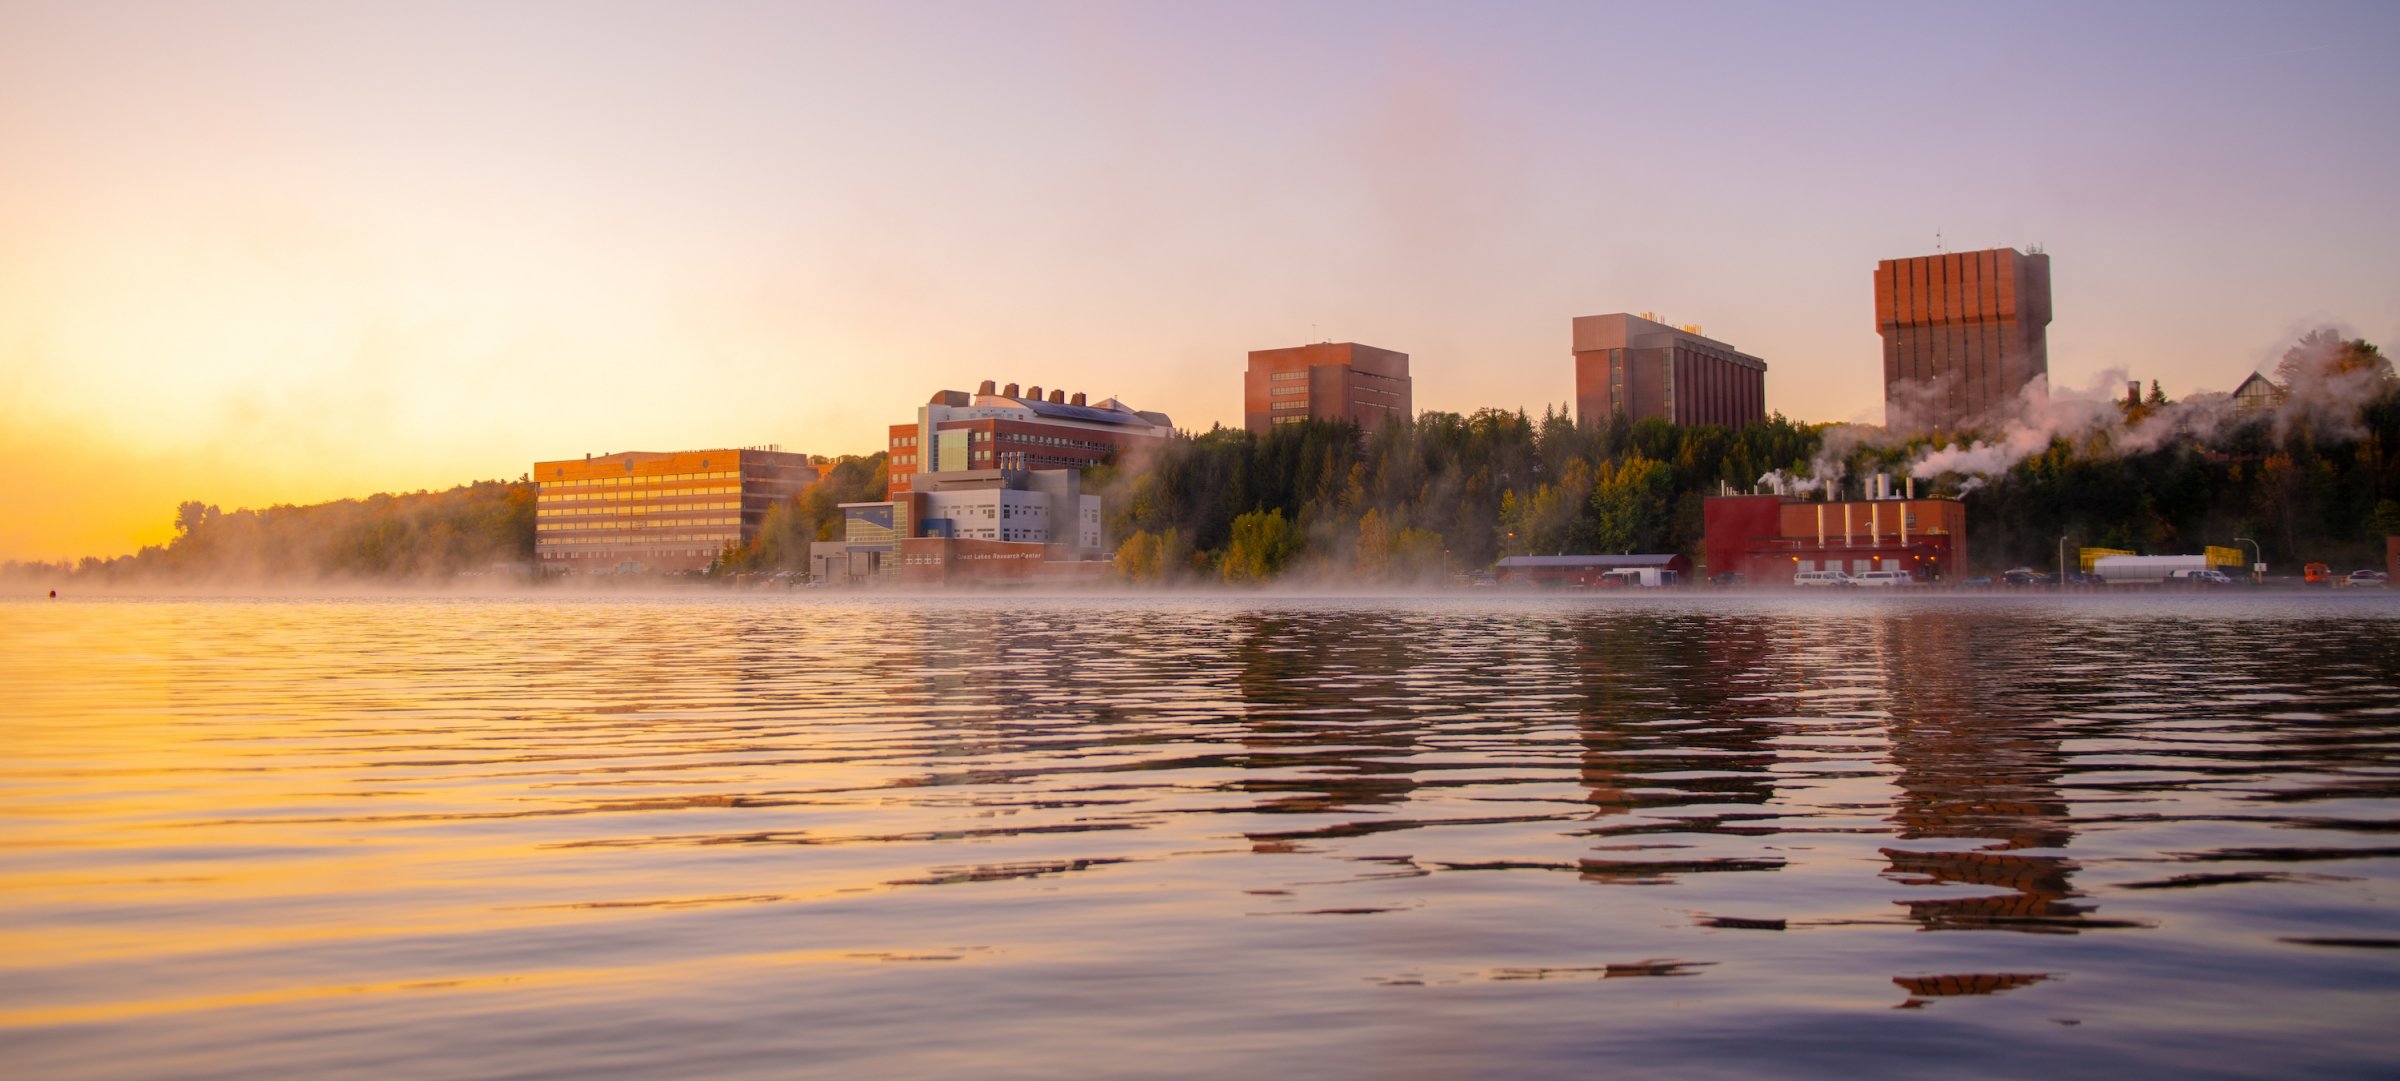 View of campus from the Portage Canal on a misty morning.